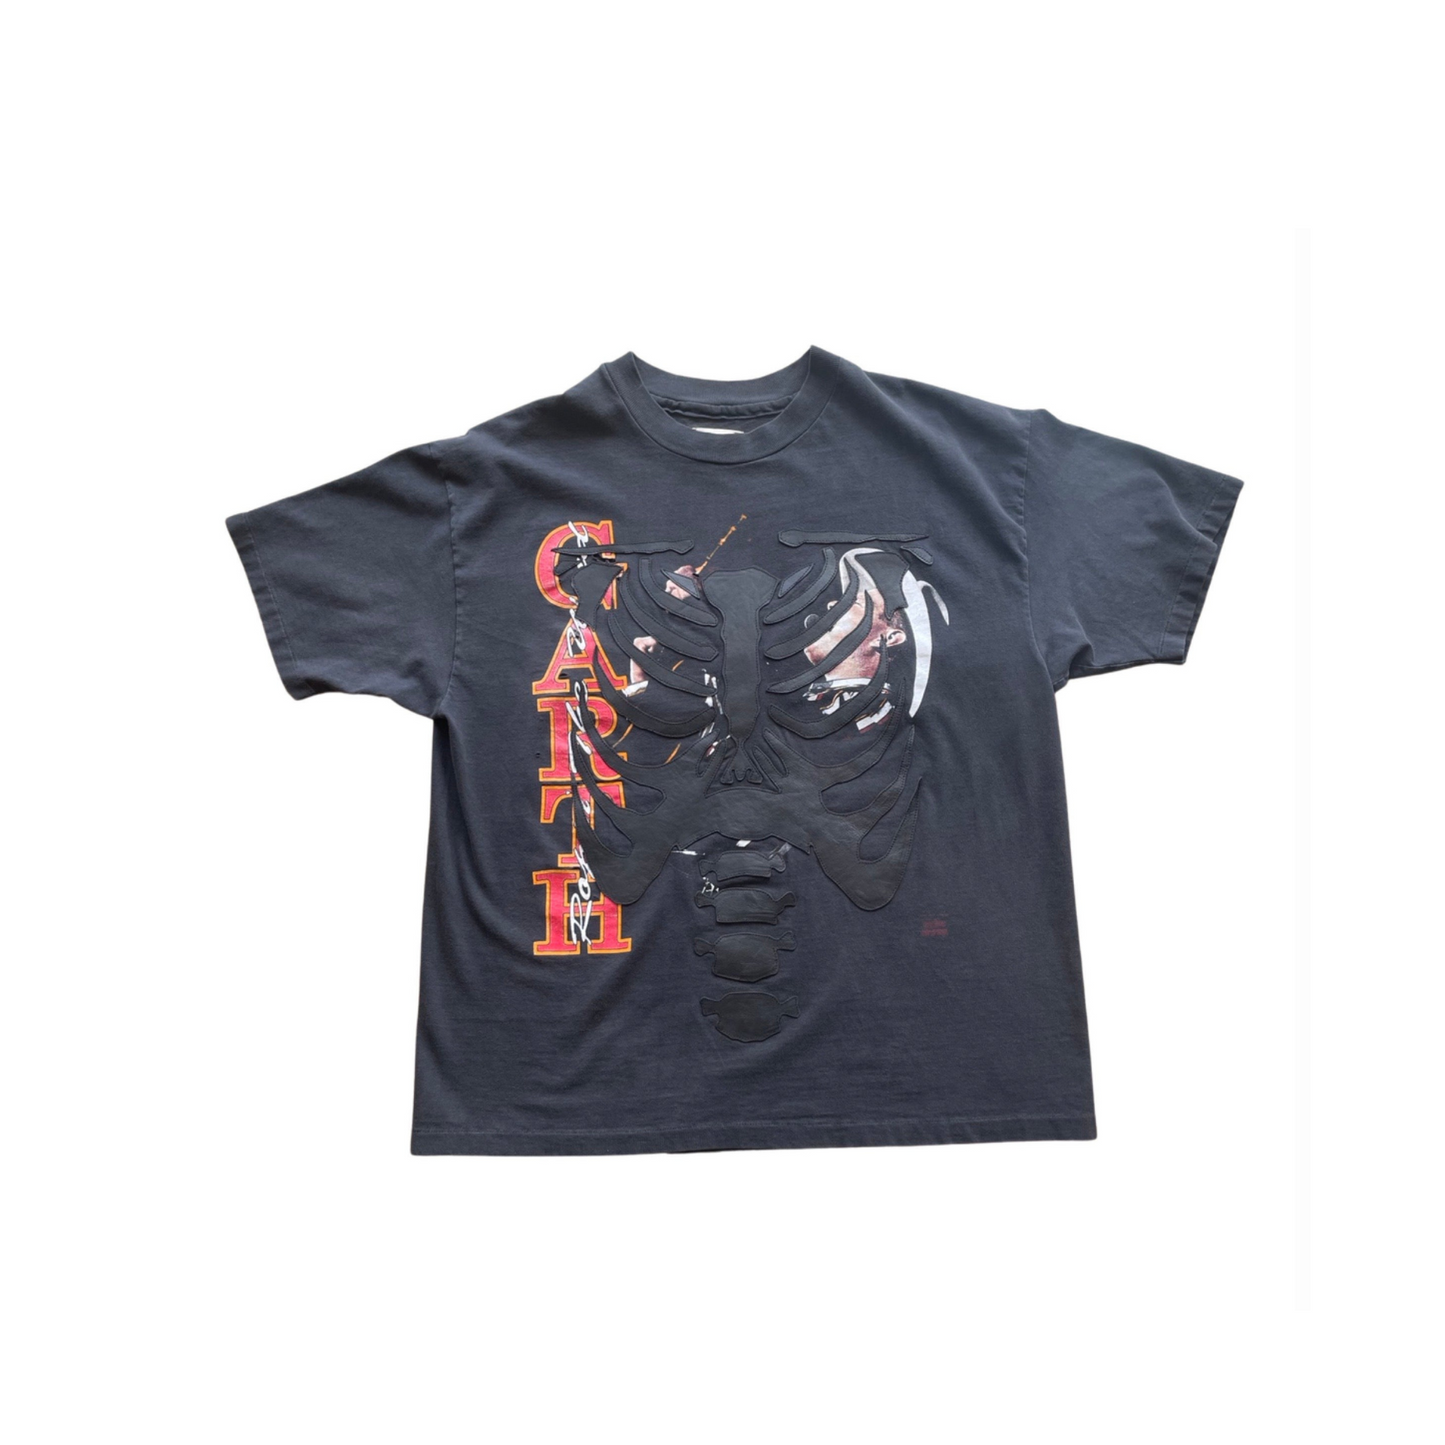 1991 Garth Brooks T-shirt with Leather Ribcage Appliqué